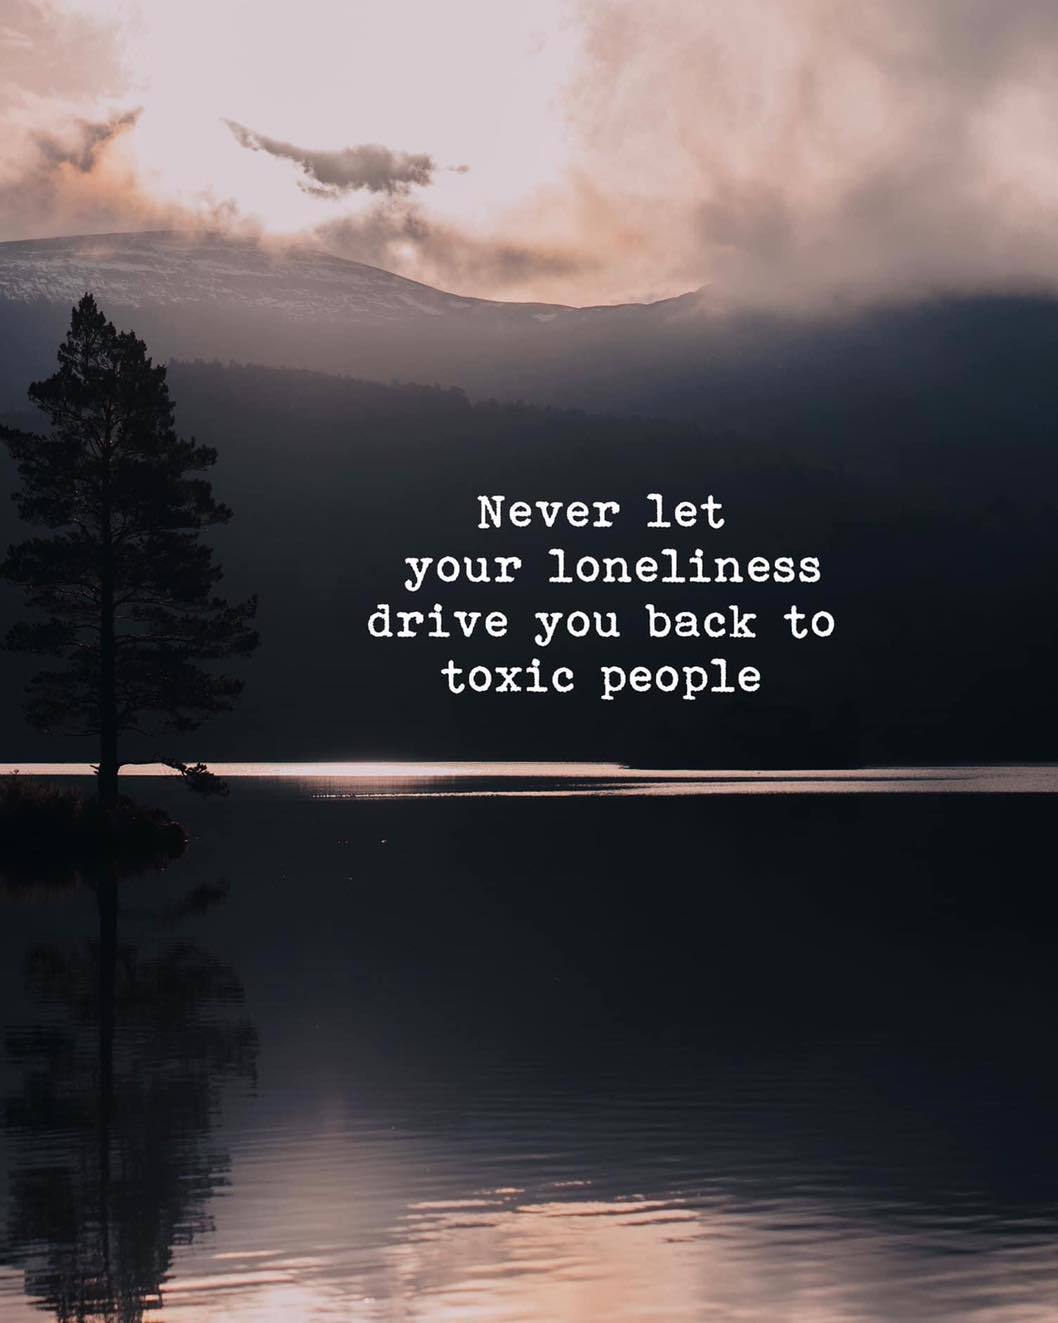 Quotes 'nd Notes - Never let your loneliness drive you back to ...